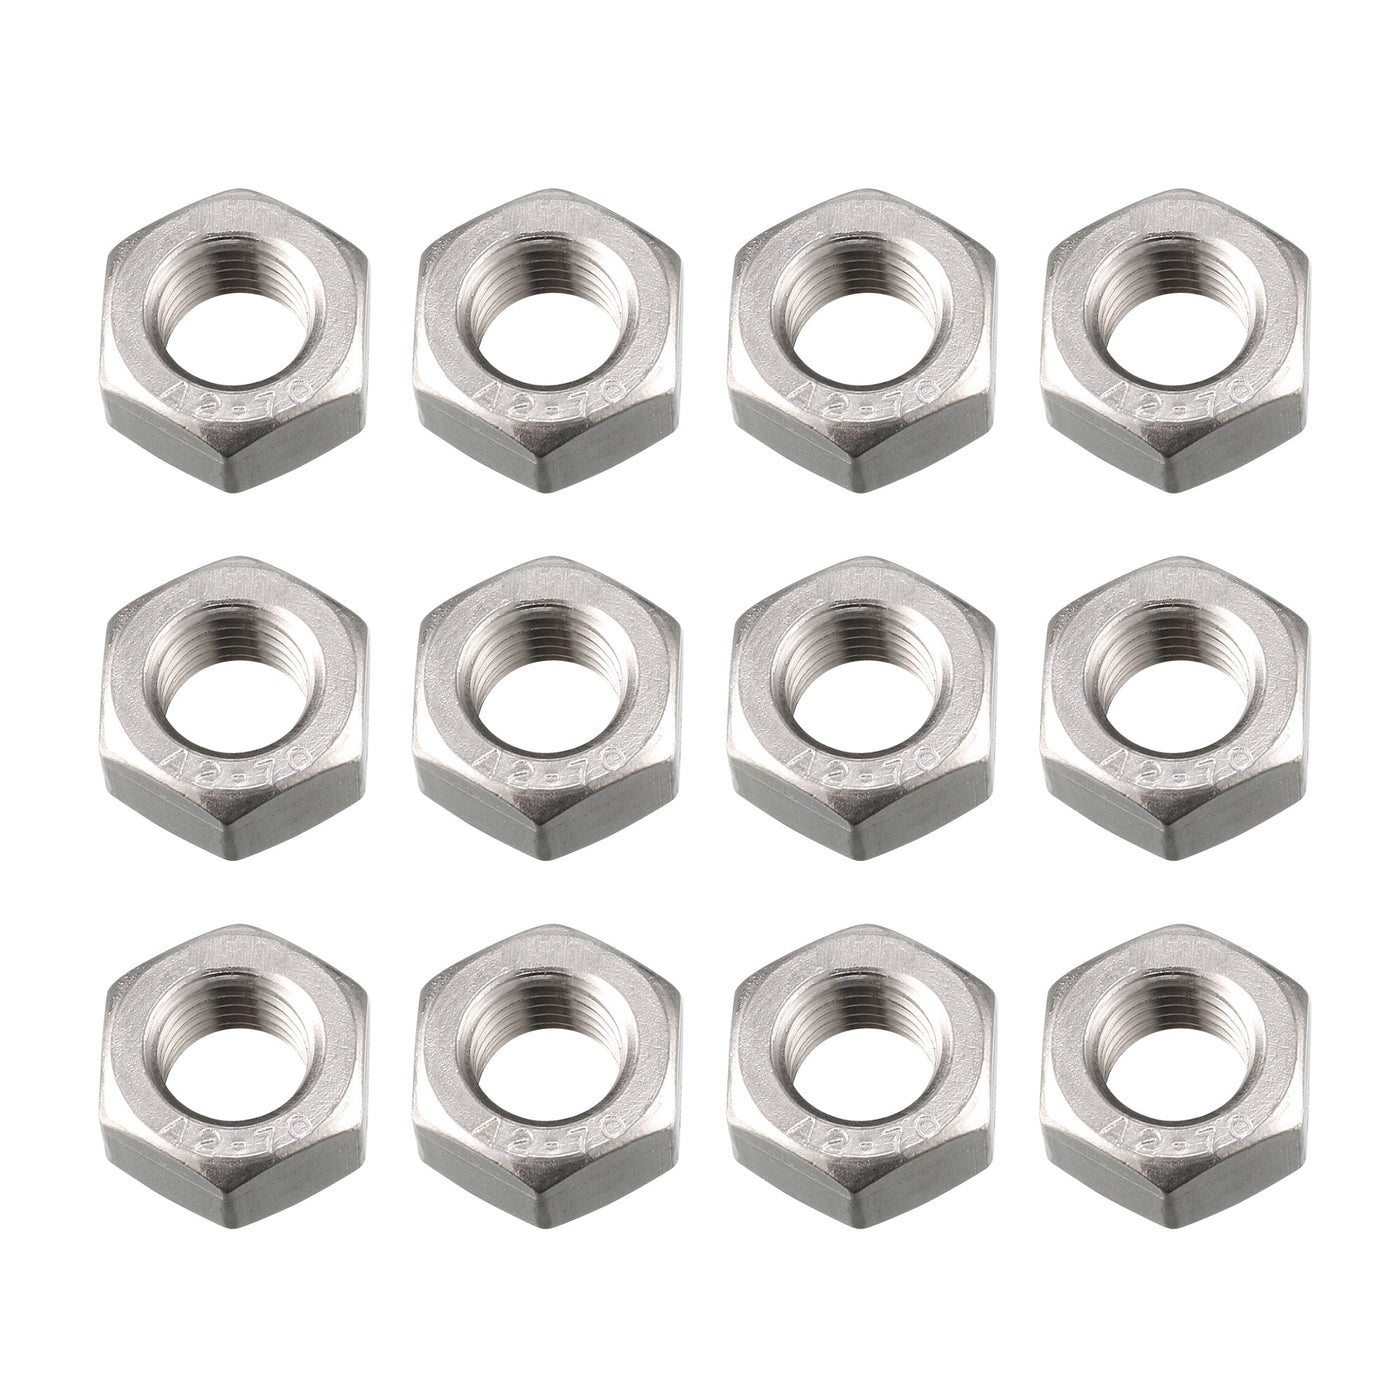 uxcell Uxcell Hex Nuts, M12x1.5 304 Stainless Steel Thread Hexagon Nut 12pcs